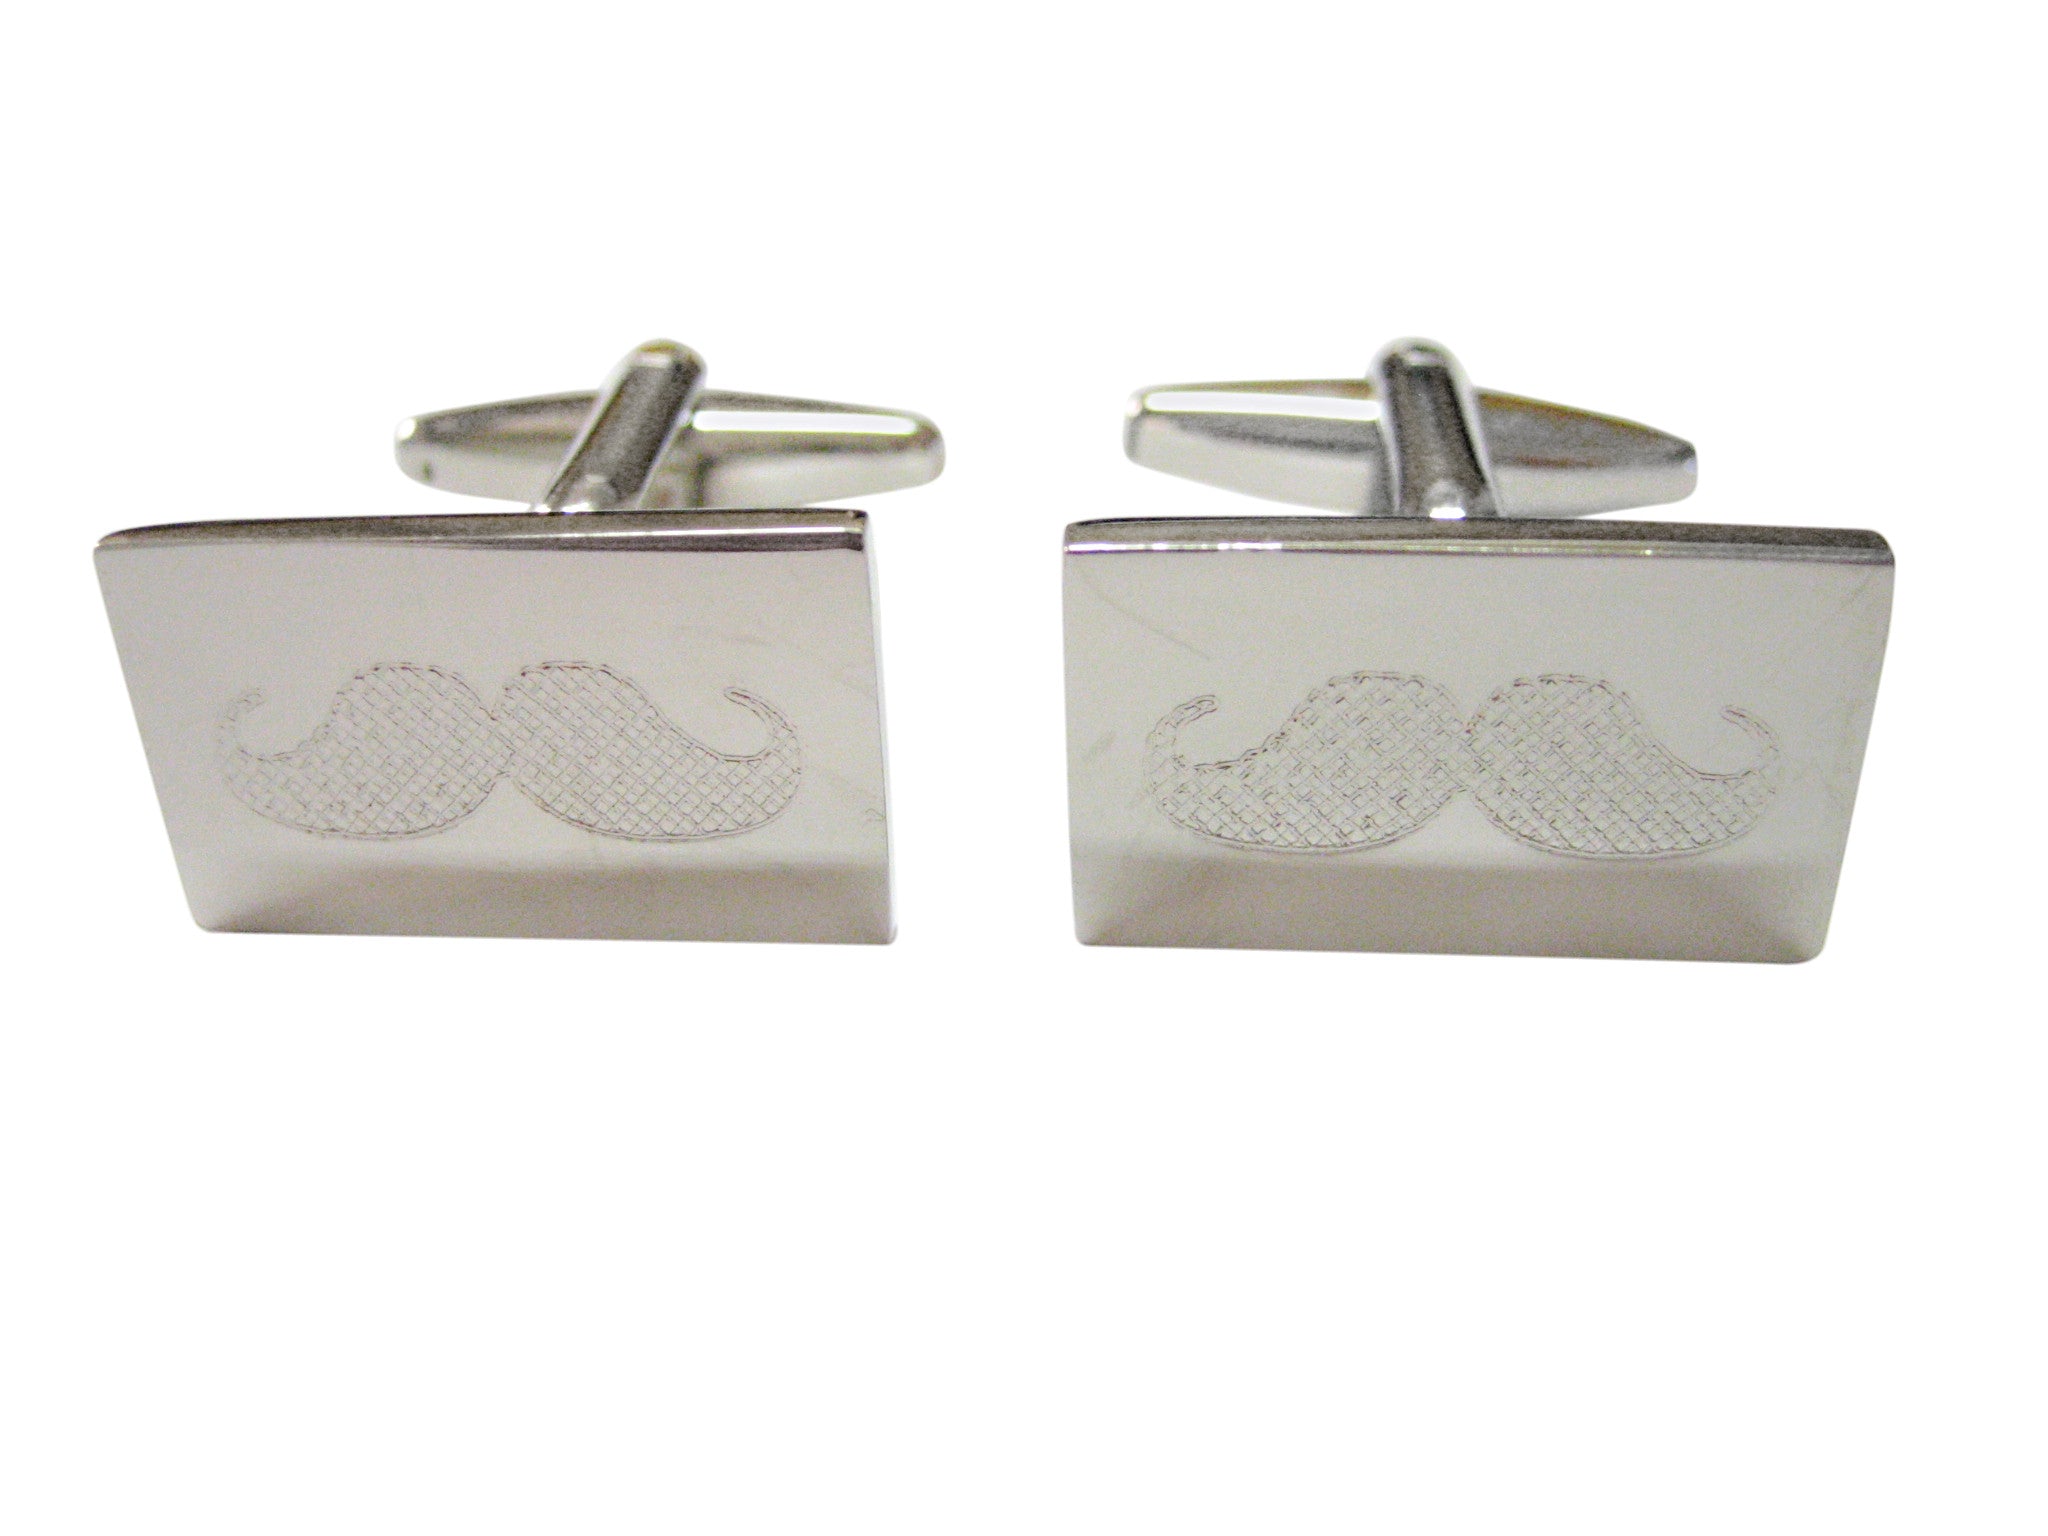 Silver Toned Etched Mustache Cufflinks